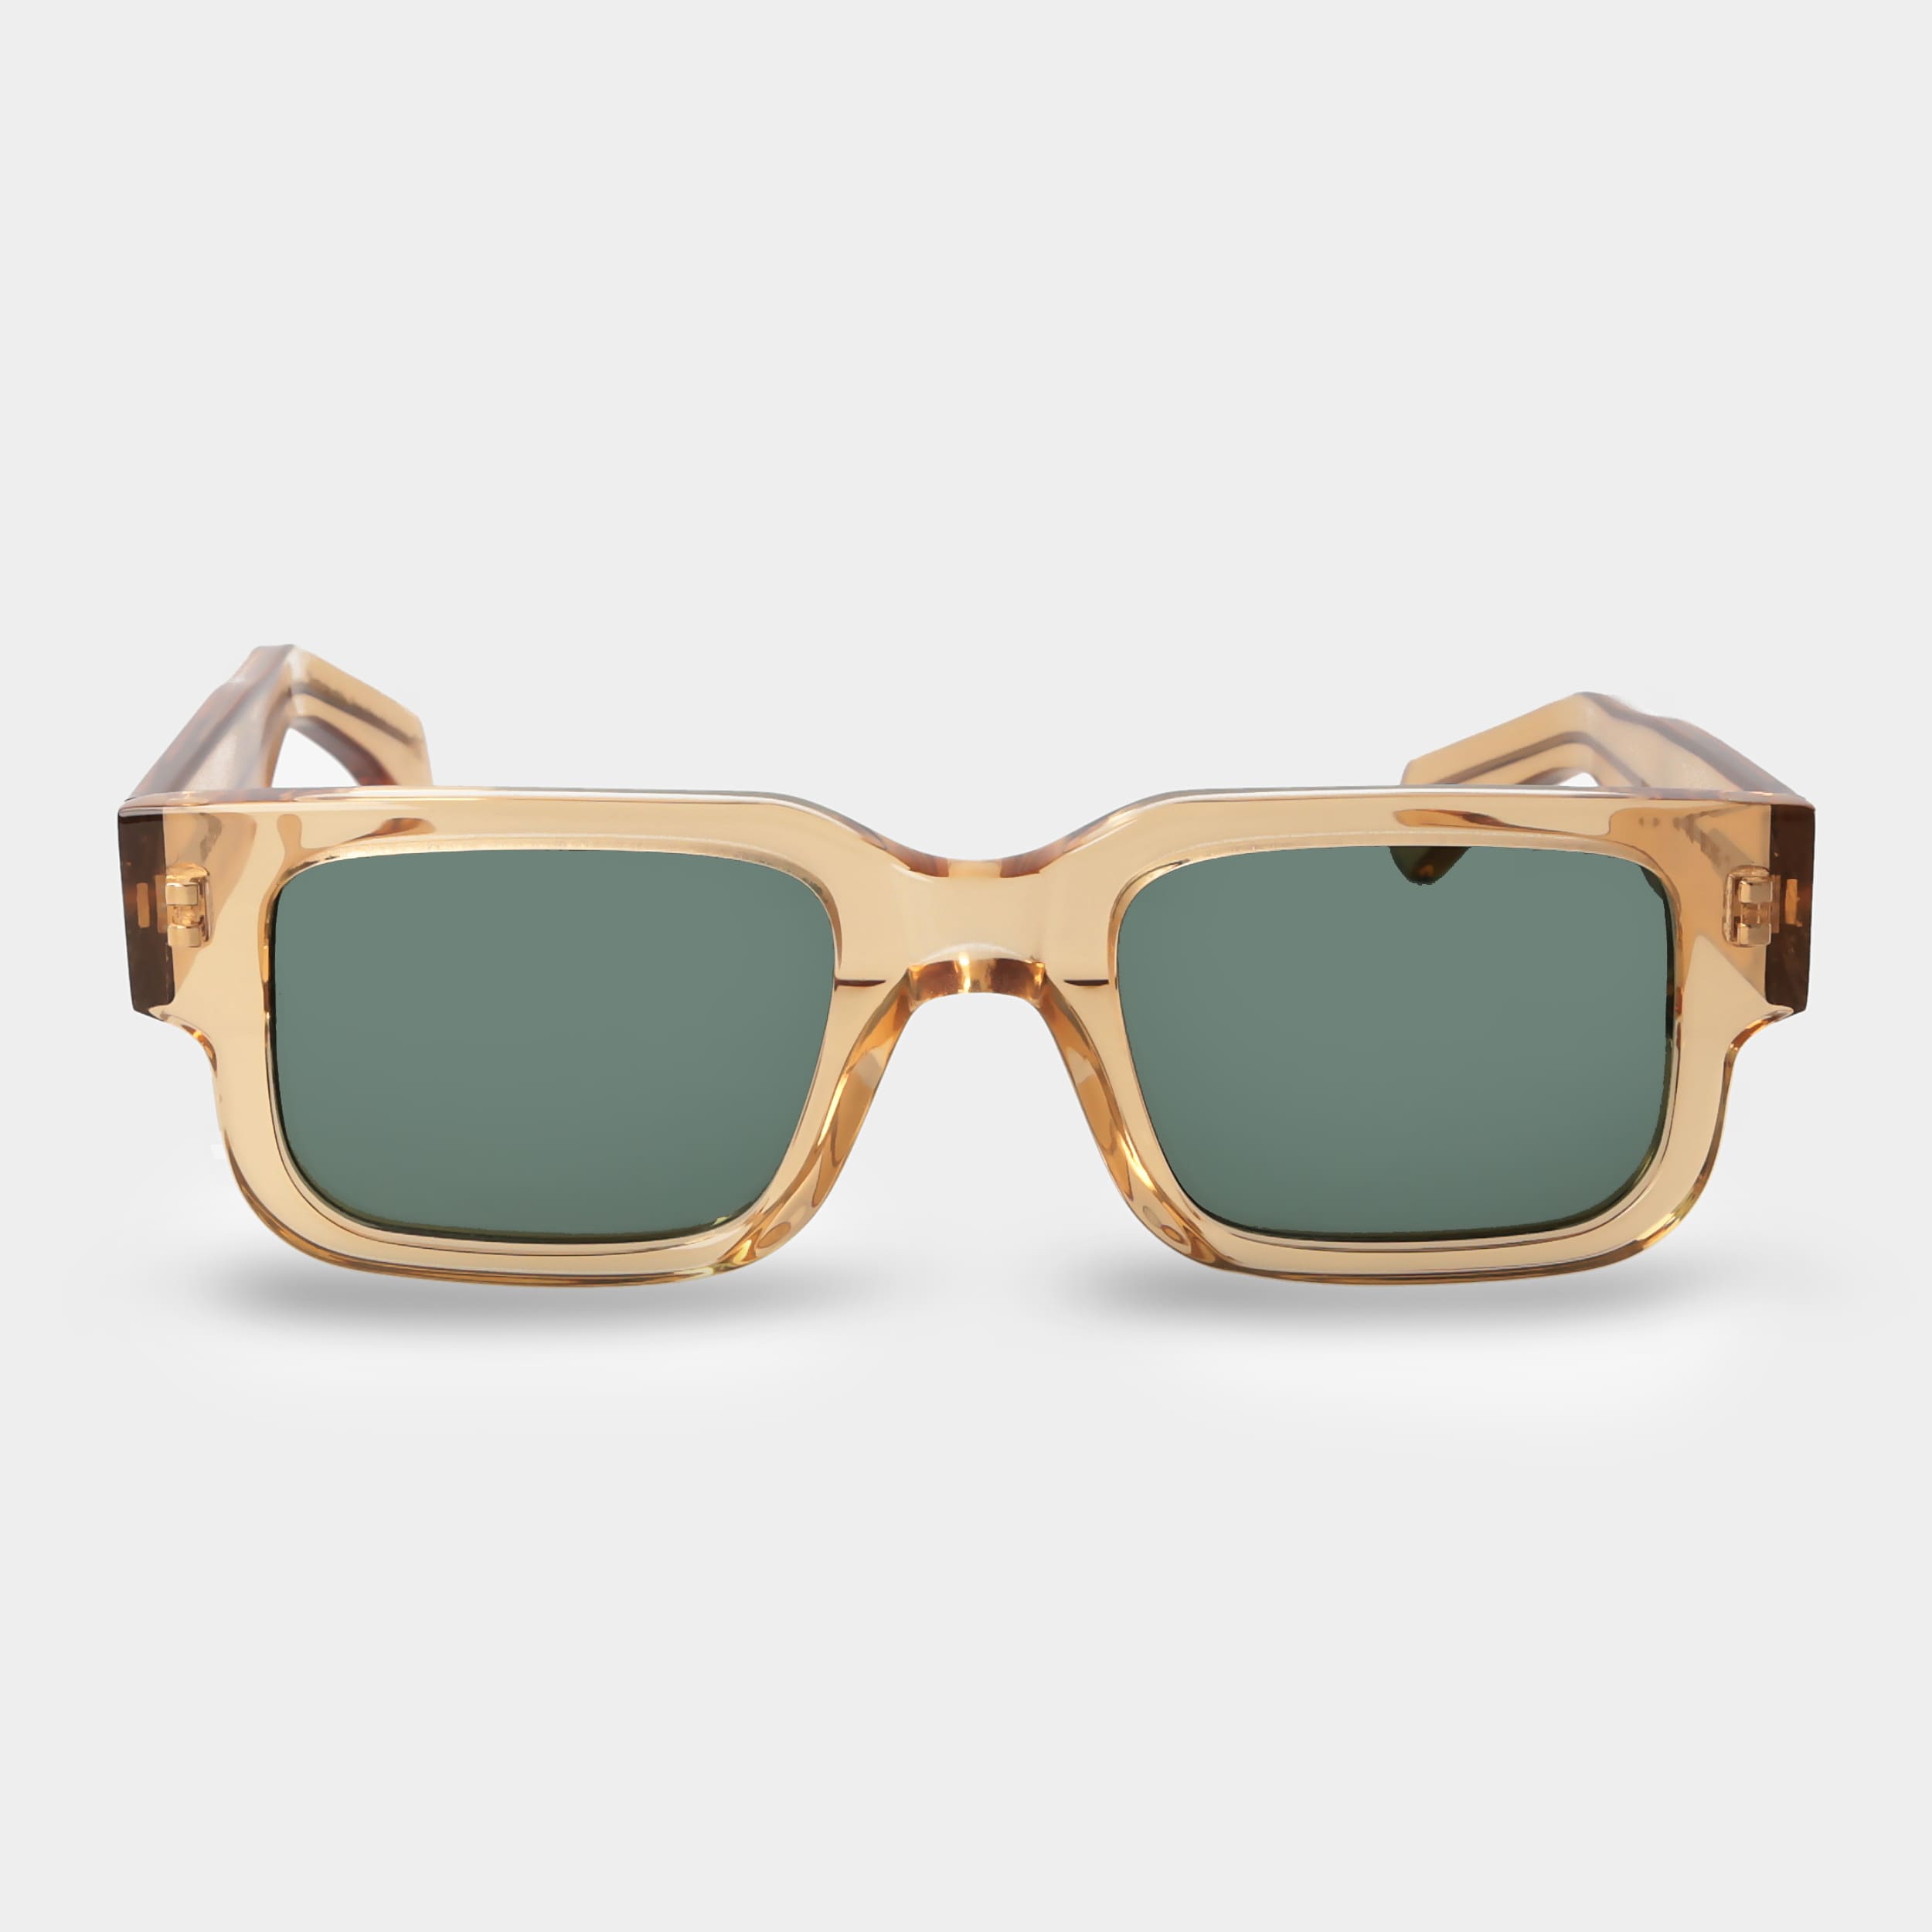 sunglasses-silk-eco-champagne-bottle-green-sustainable-tbd-eyewear-front